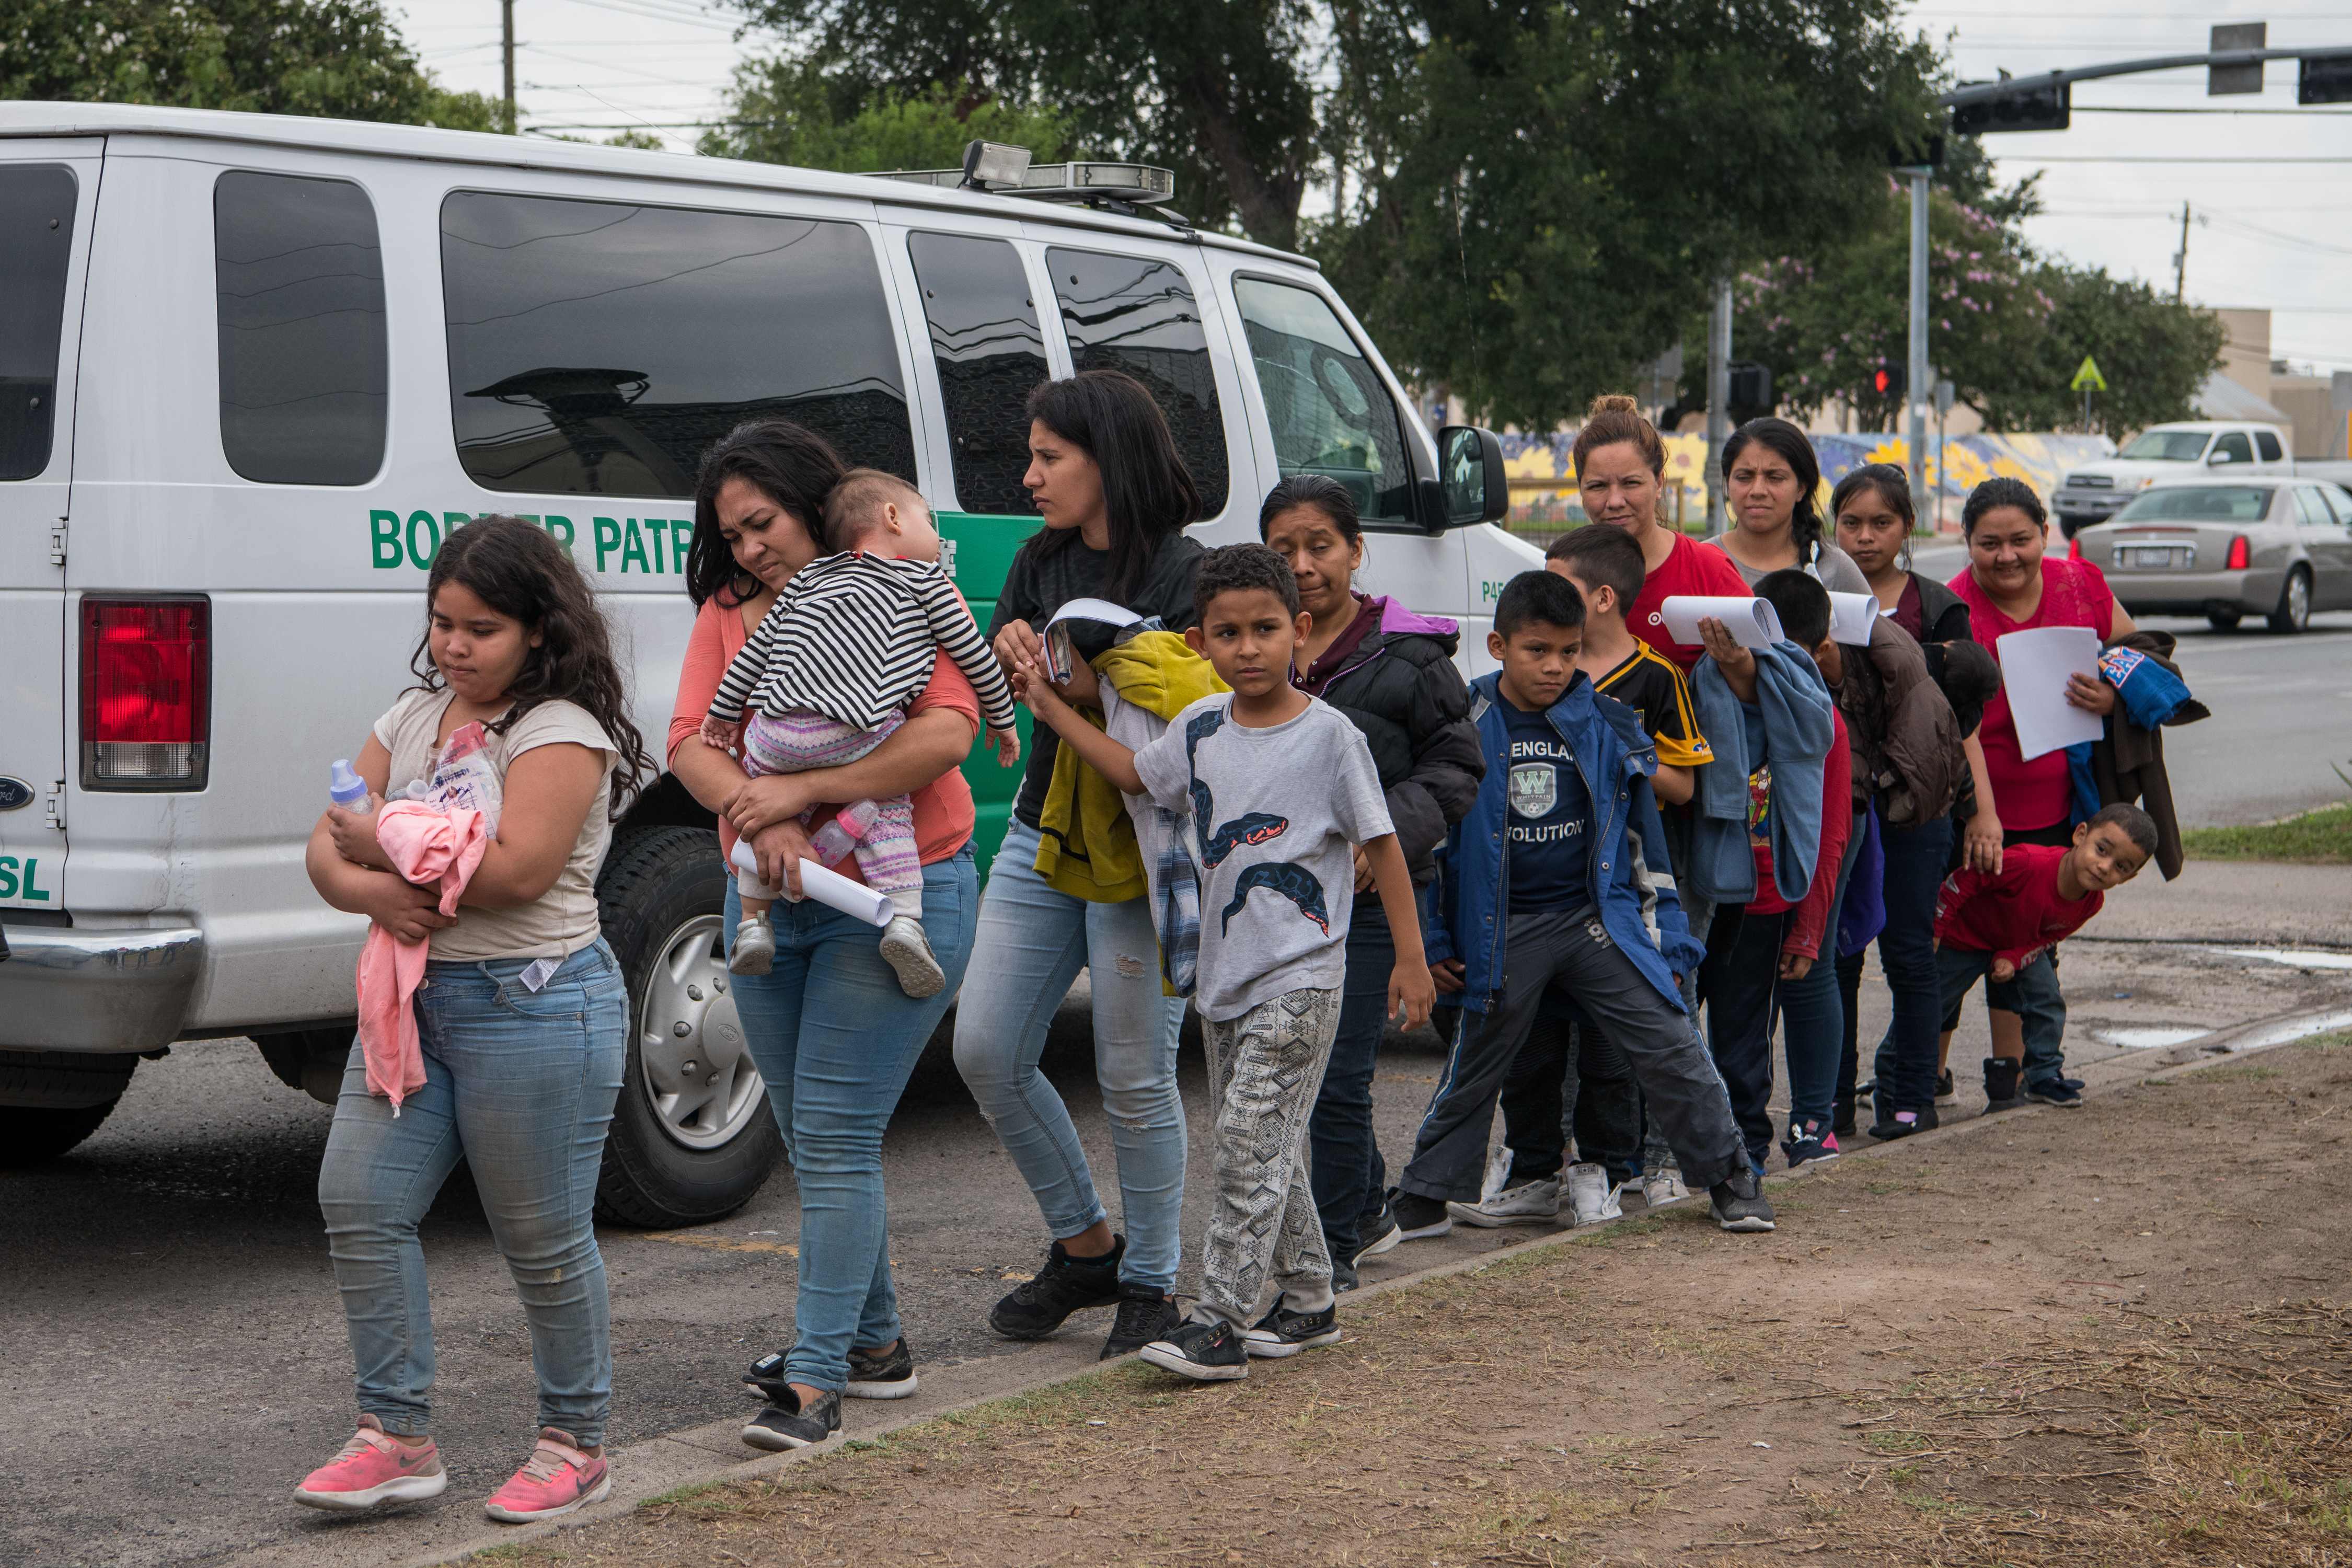 MCALLEN, Texas – Central American migrant families arrive at a Catholic Charities respite center after being released from federal detention  on June 12, 2019.